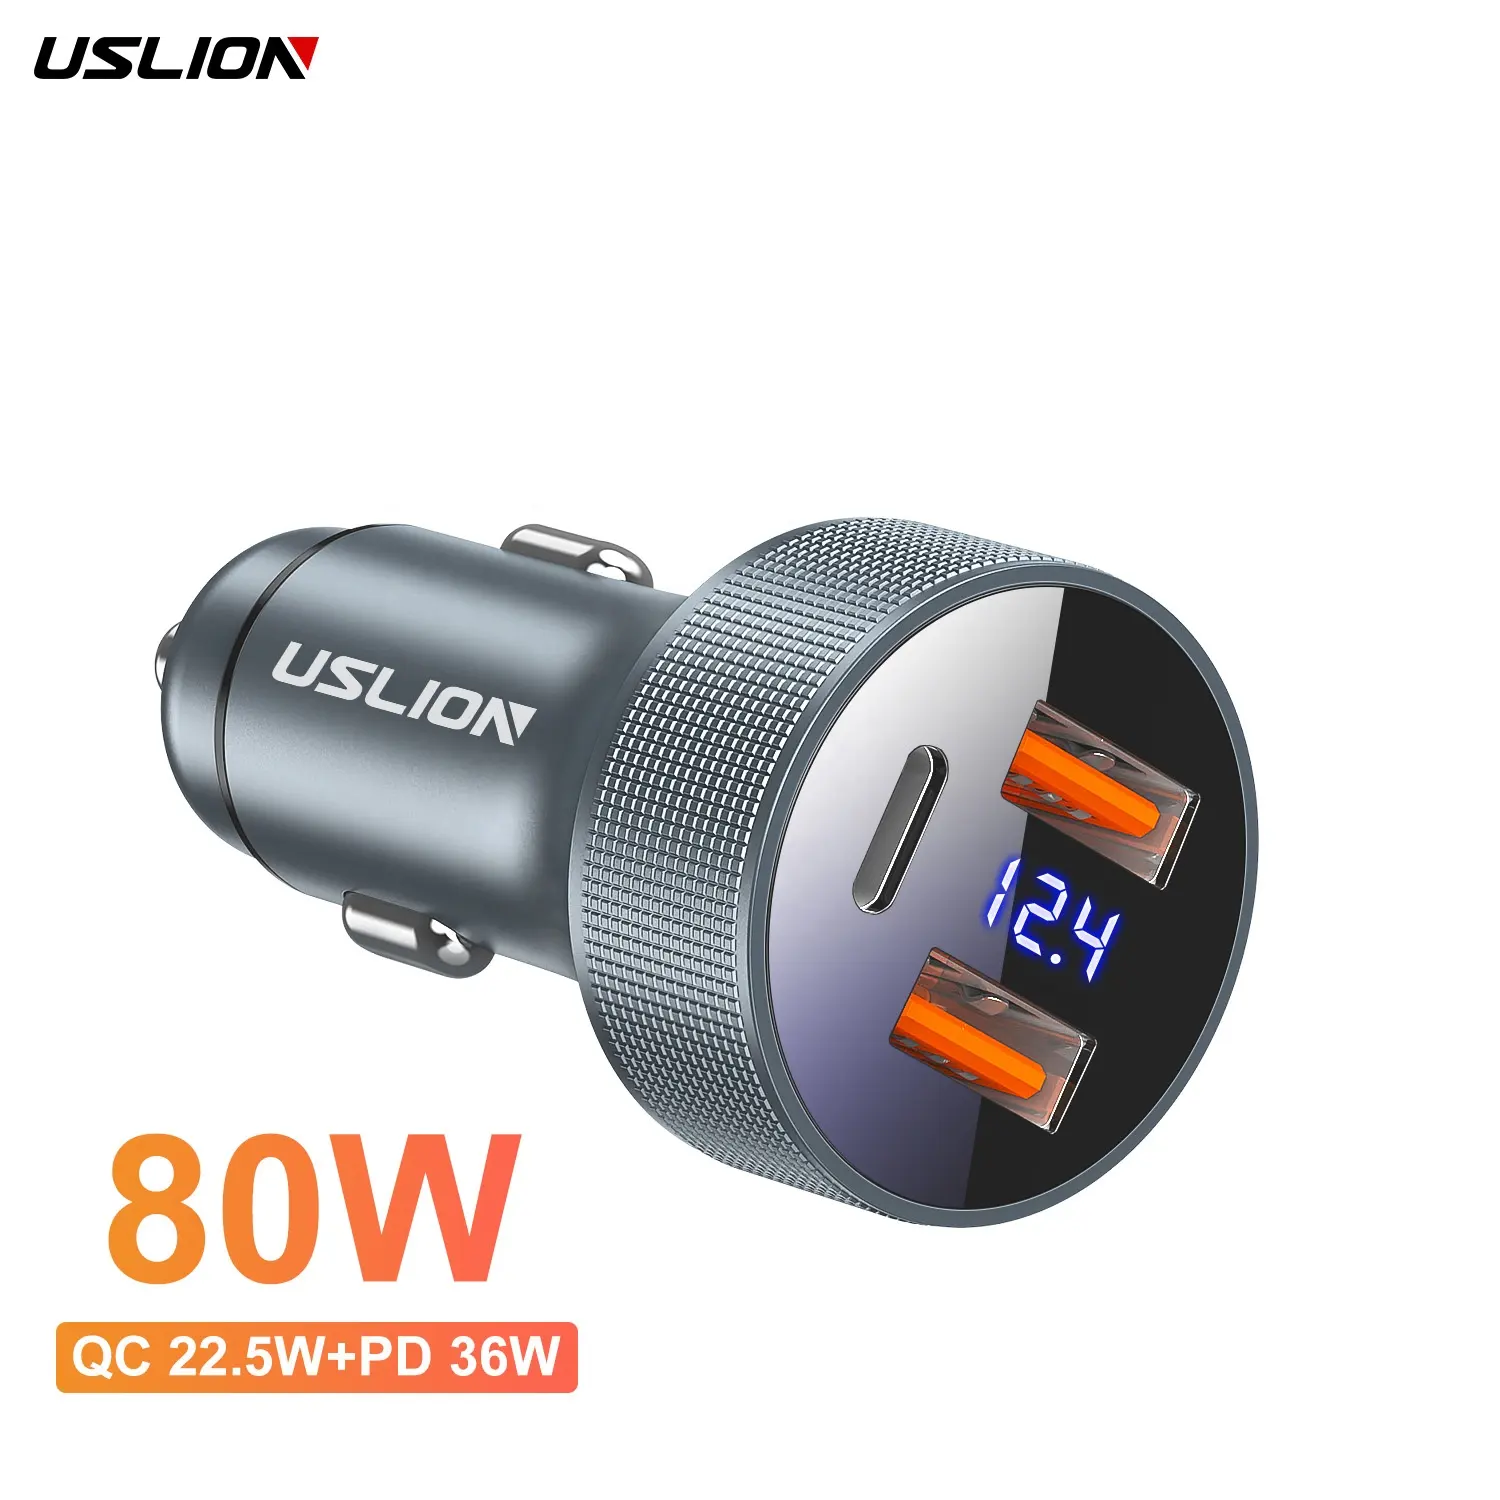 USLION 80W PD+2 USB Car Charger Digital Display Aluminum Alloy Car Charger Fast Charging Mobile Phone Tablet Laptop